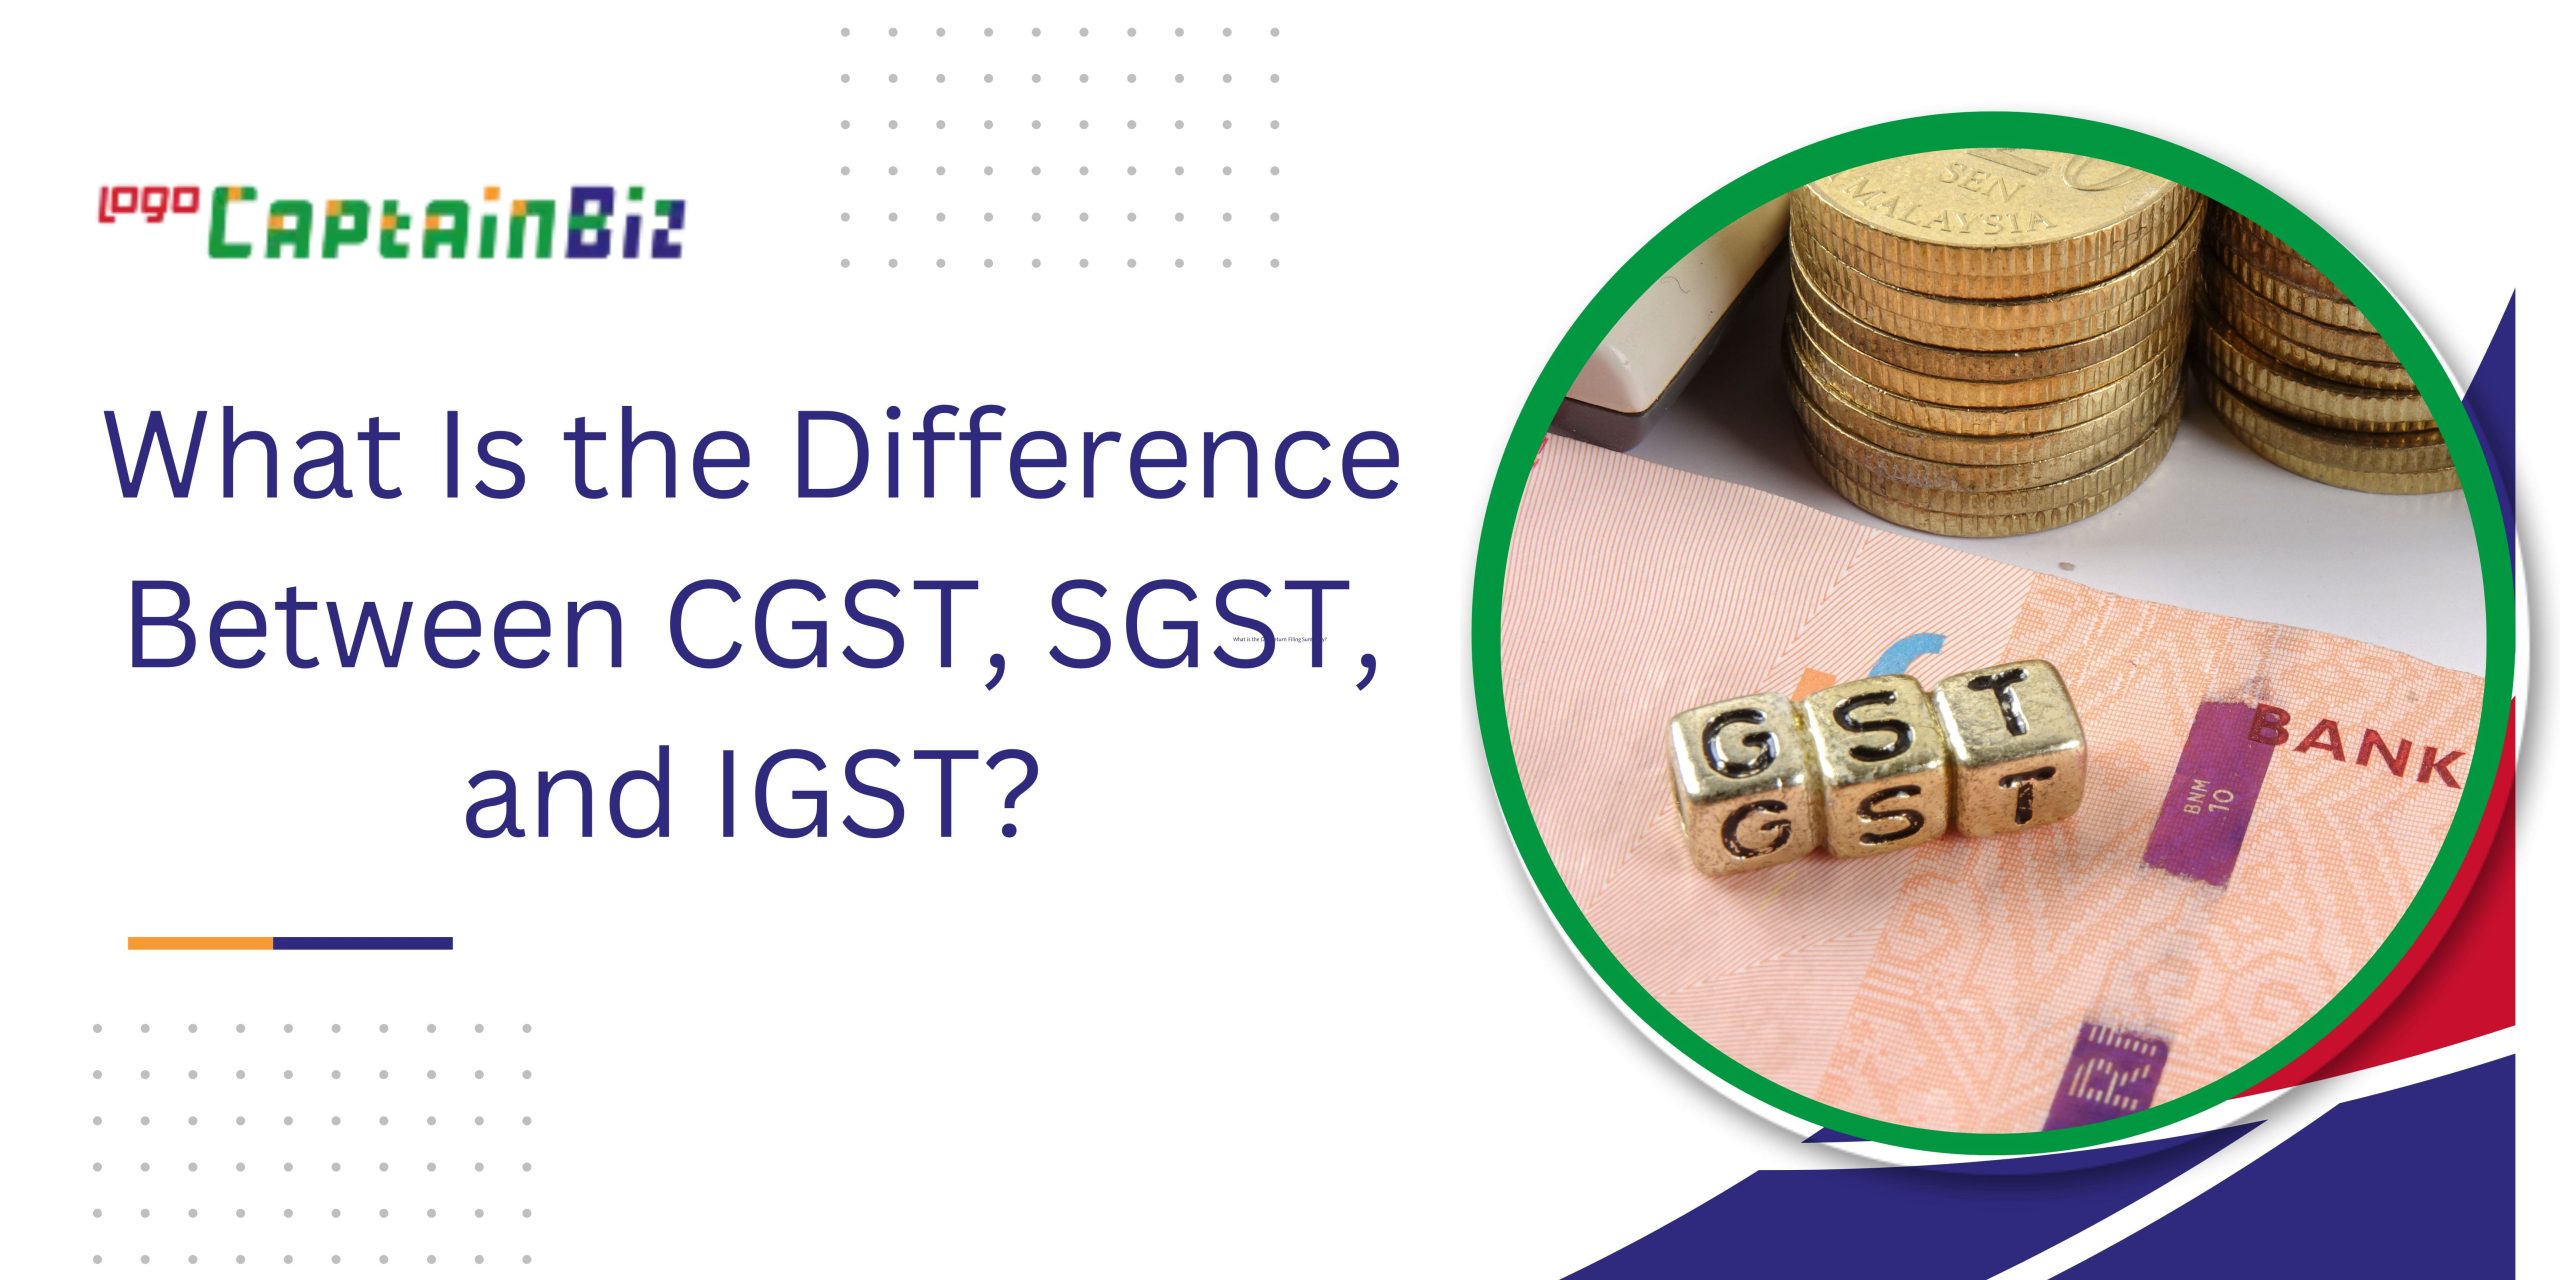 CaptainBiz: What Is the Difference Between CGST, SGST, and IGST?